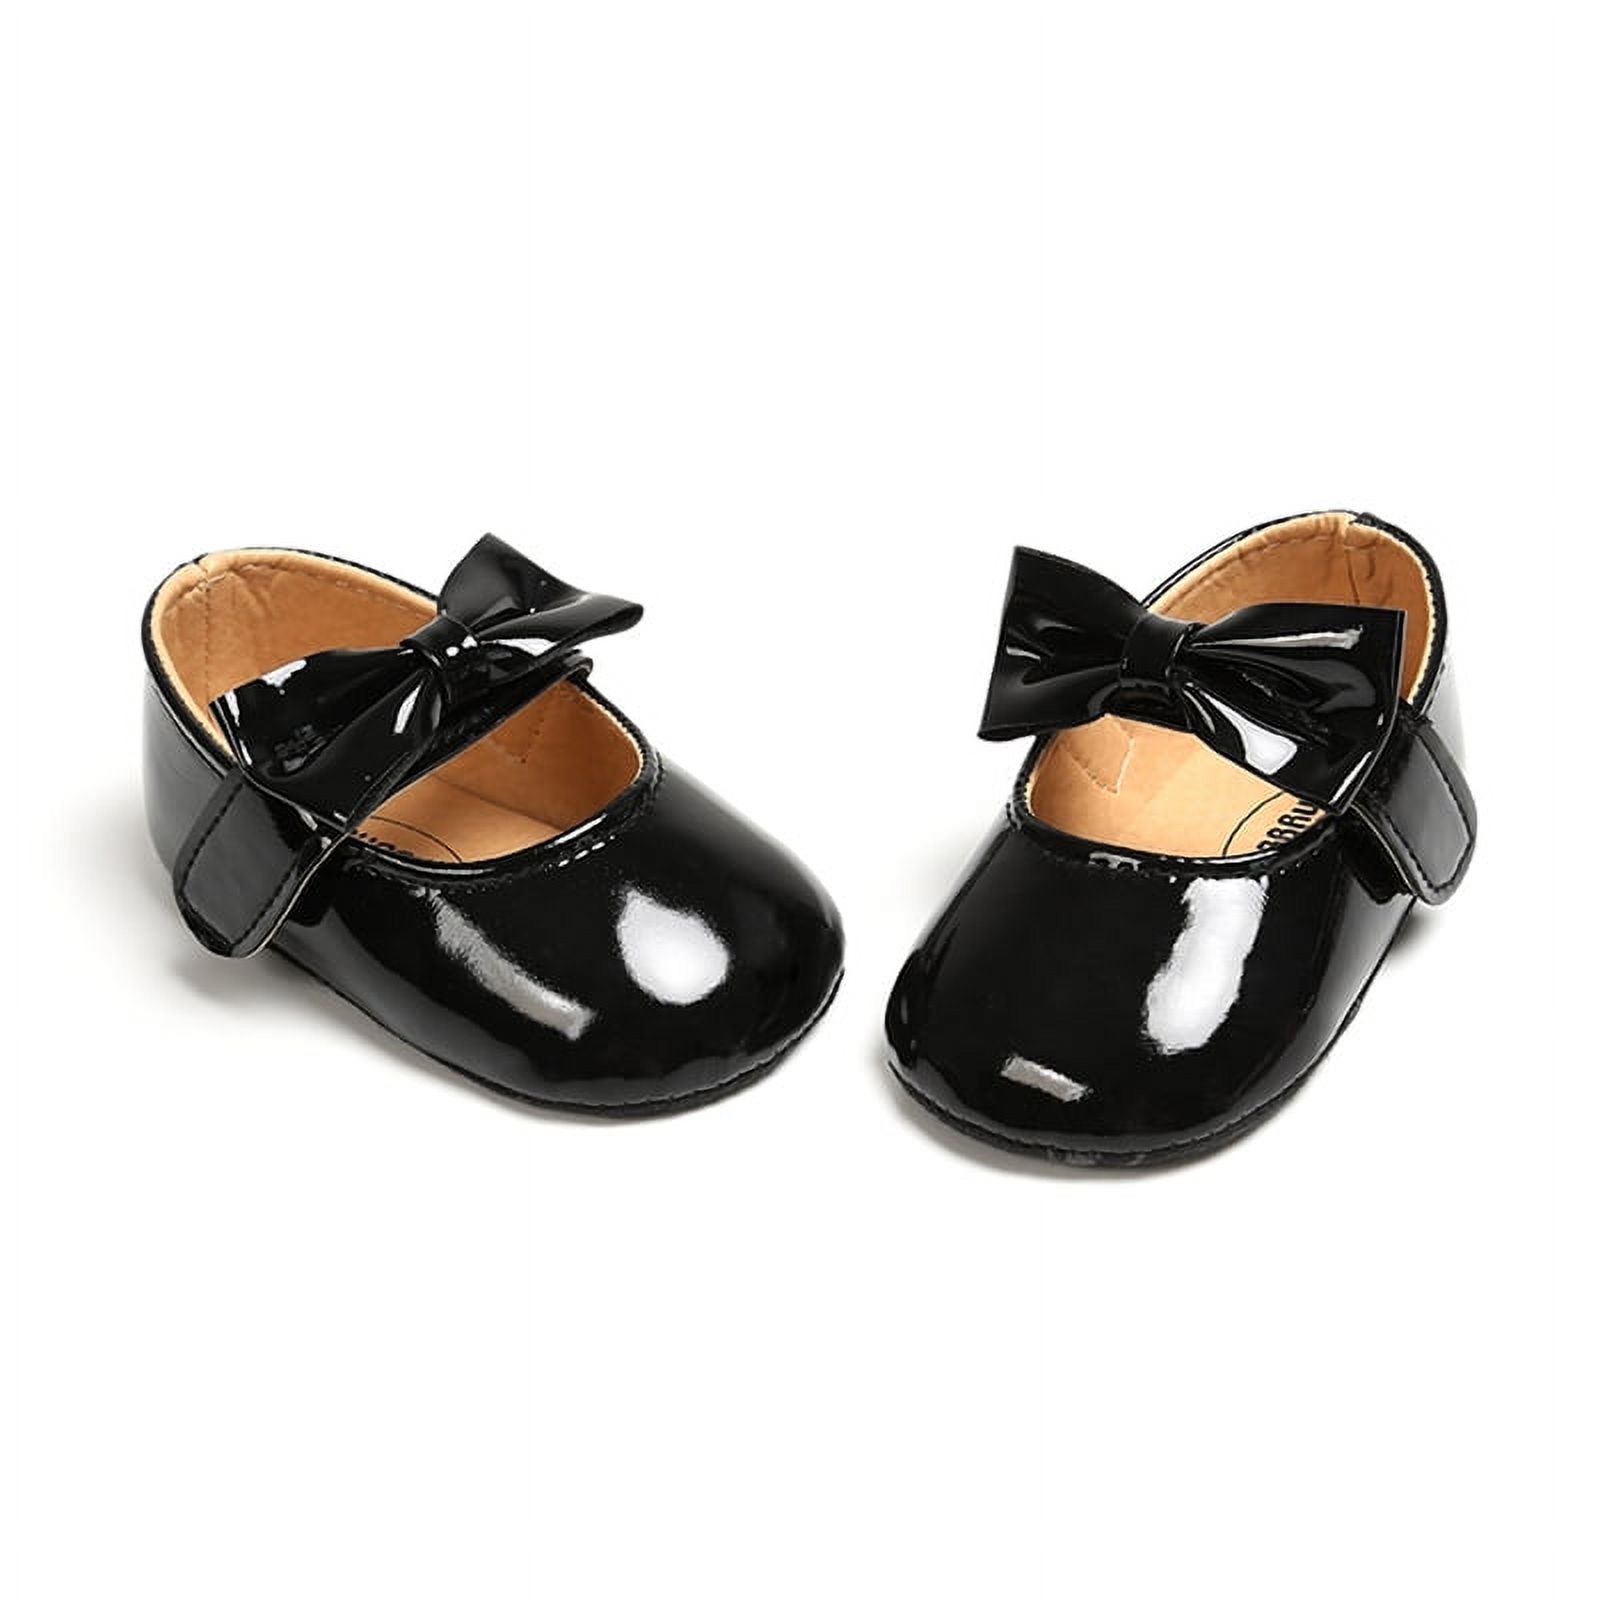 Infant Toddler Baby Girl's Soft Sole Anti-Slip Casual Shoes PU Leather Bowknot Princess Shoes - image 4 of 7